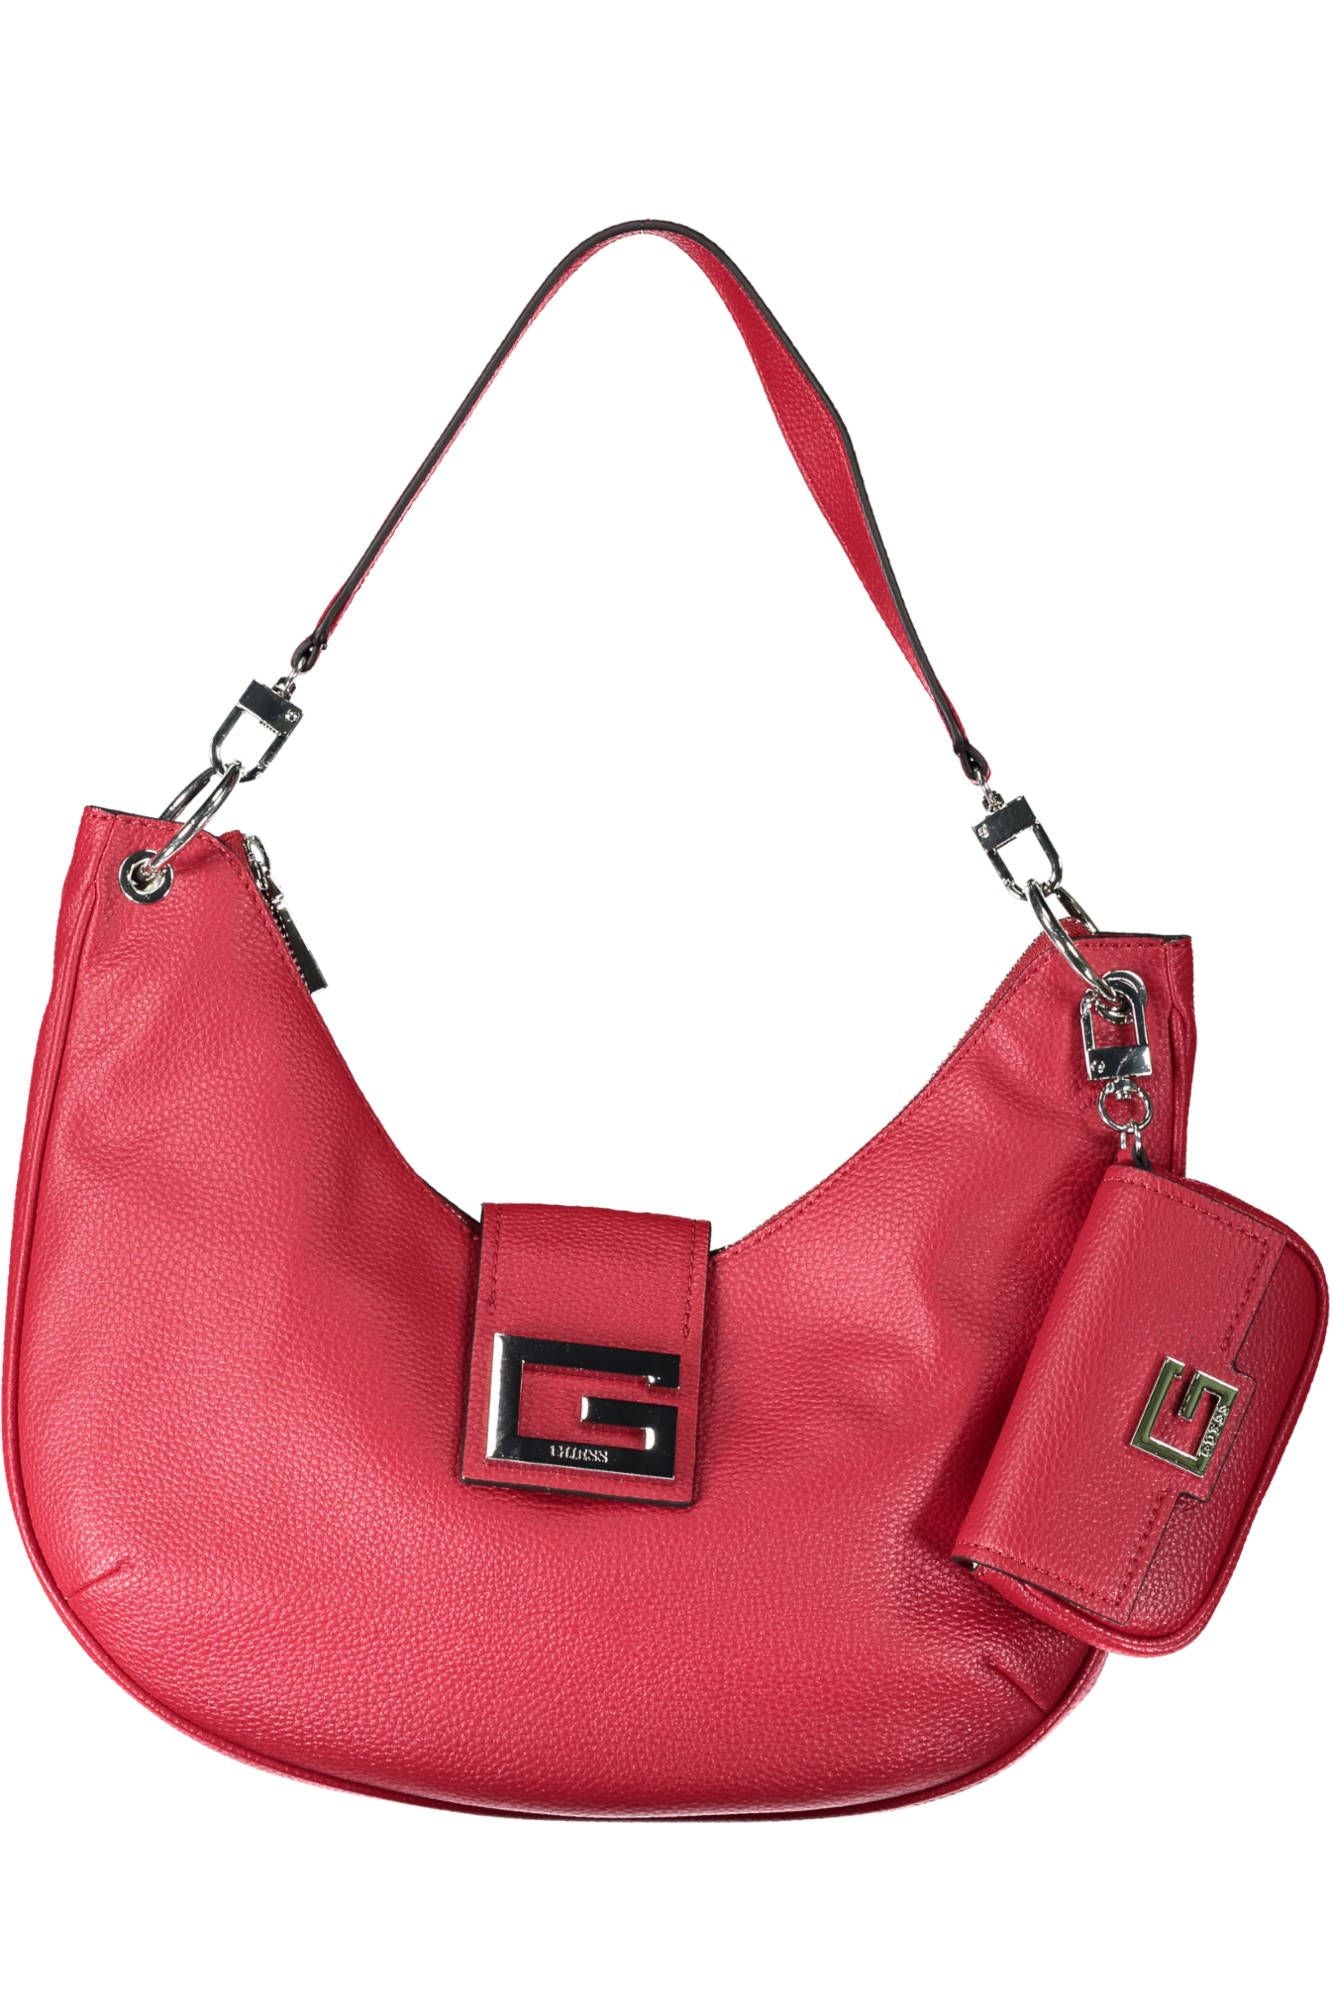 Guess Jeans Chic Red Guess Polyurethane Handbag with Coin Purse